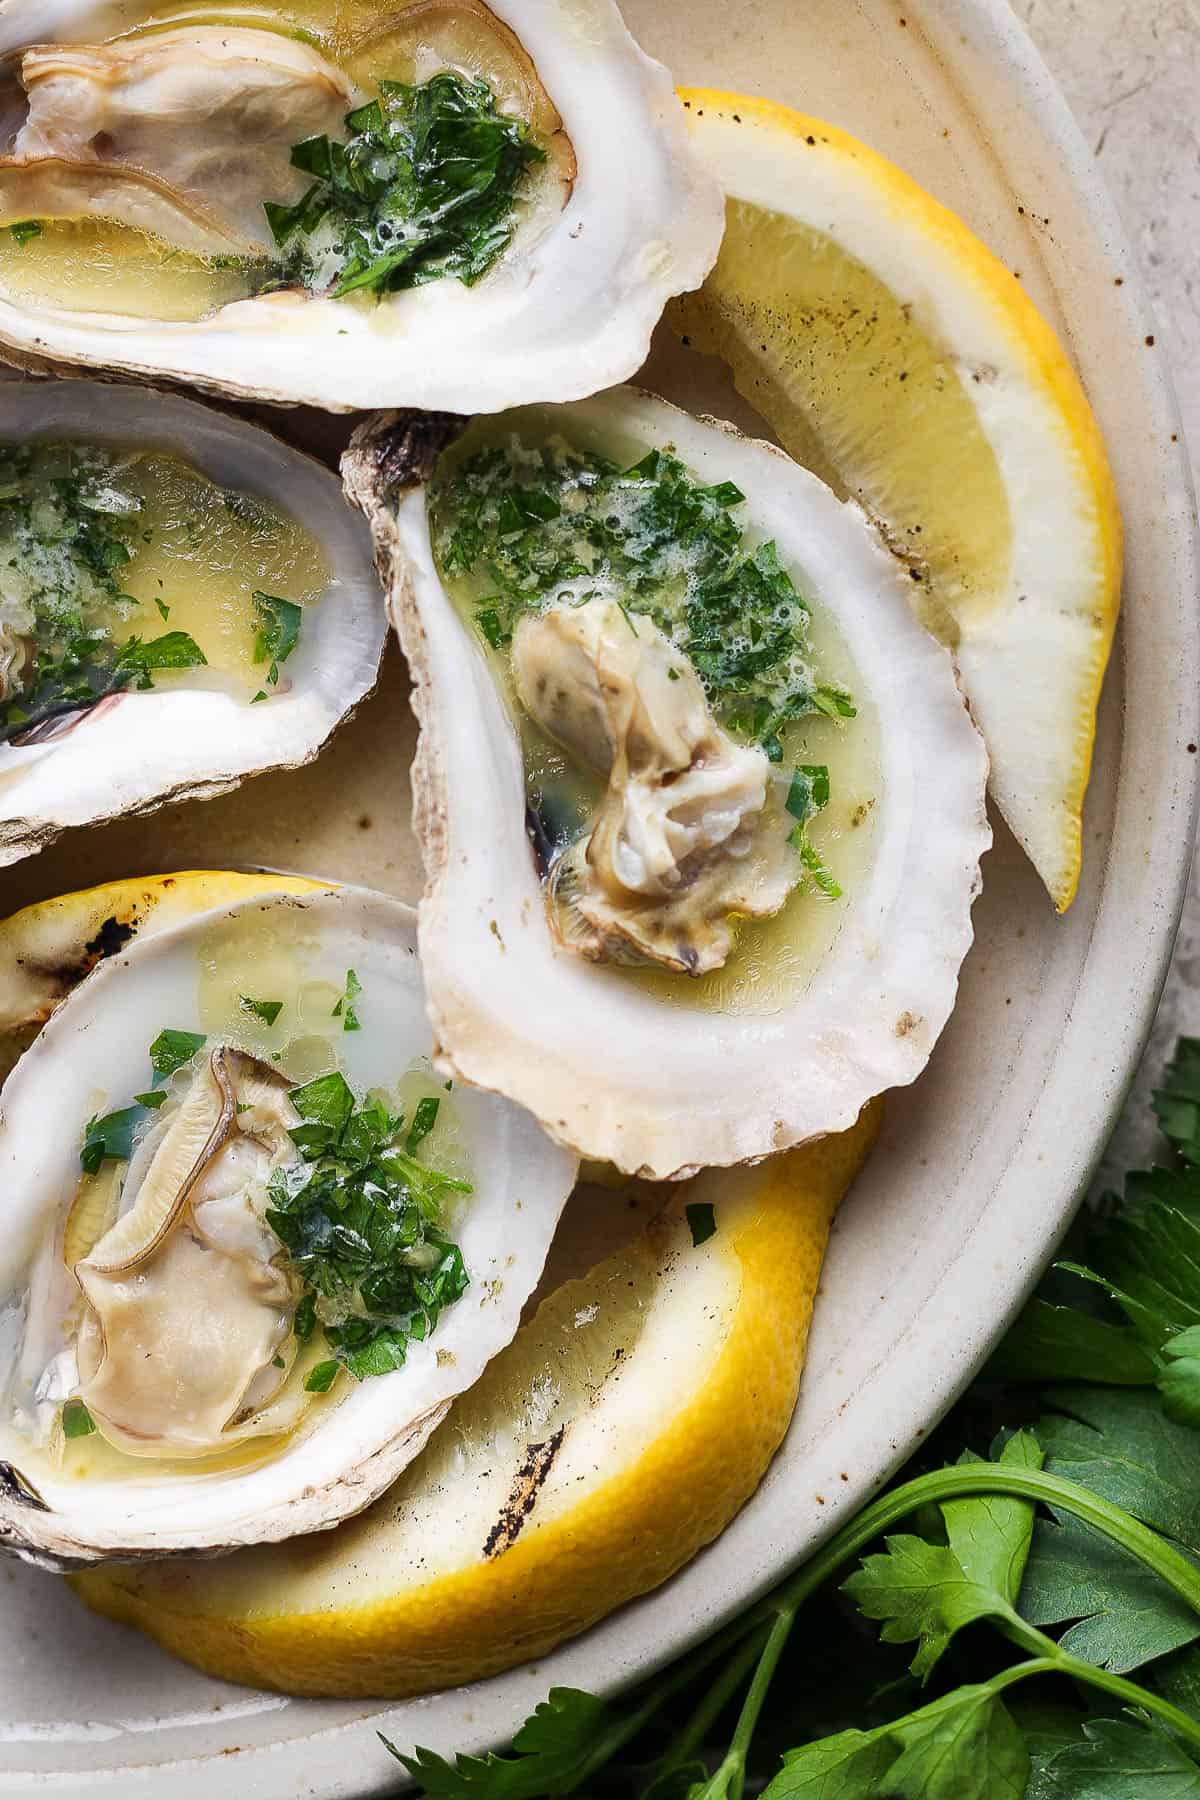 Grilled oysters on a plate with a lemon wedge.